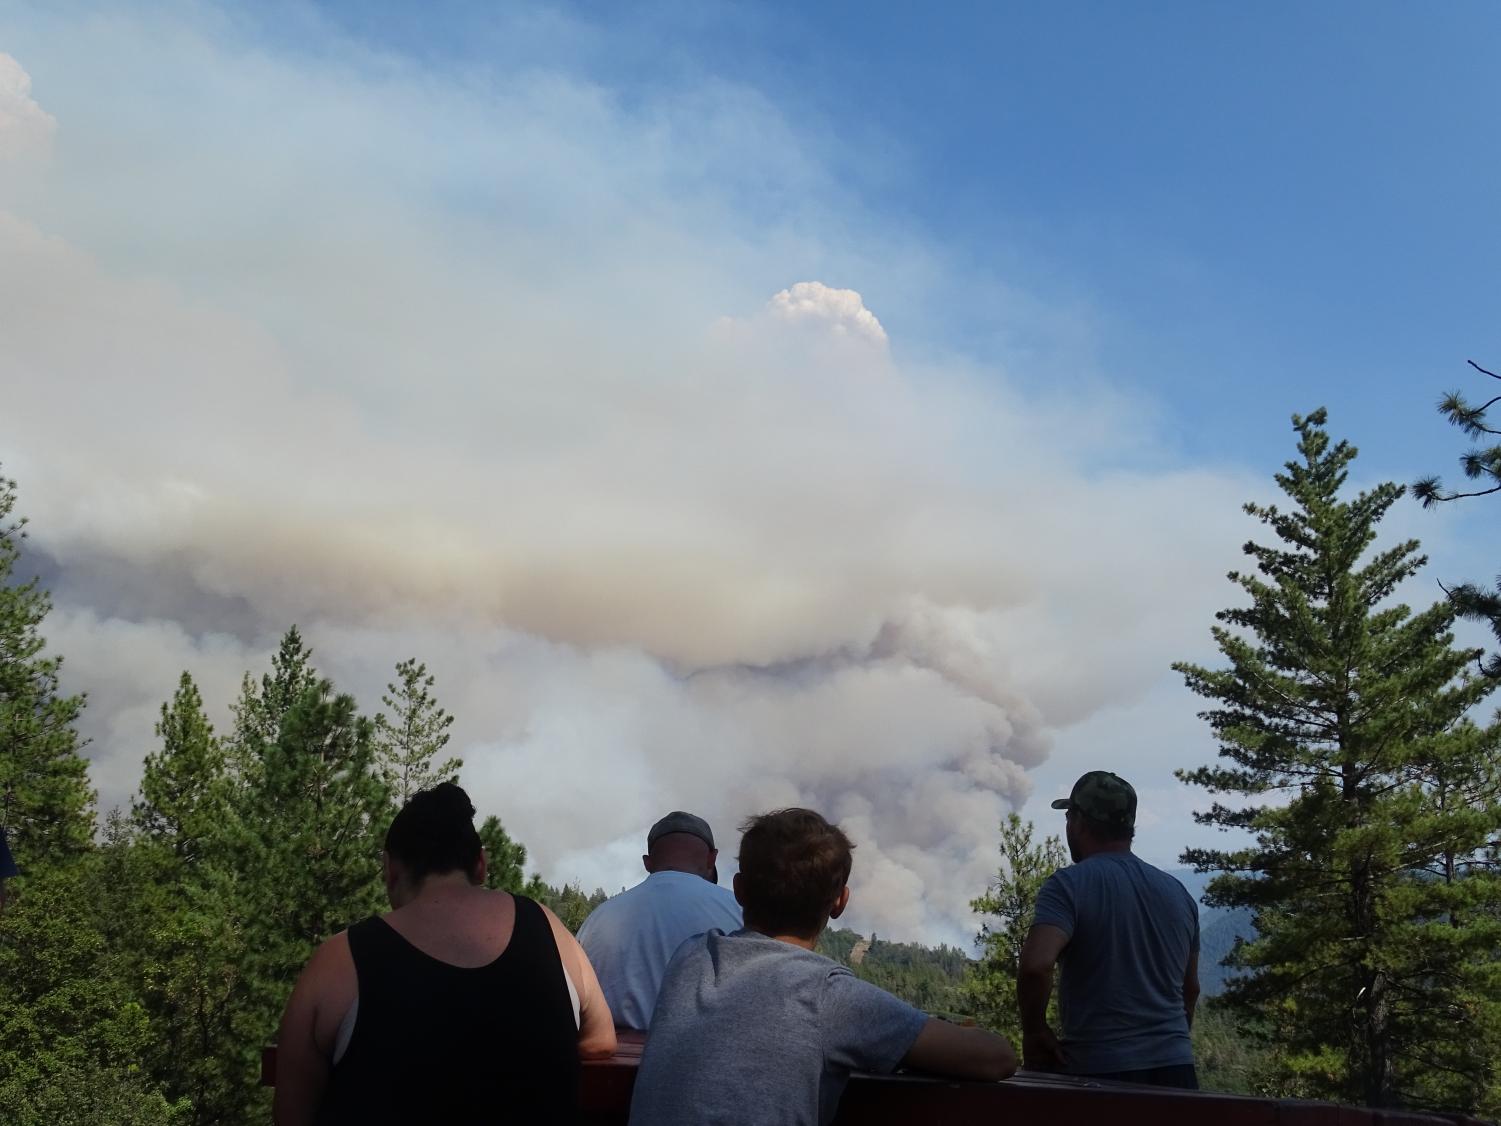 Residents of Foresthill watch the Mosquito fire, 9/7/2022. Photo by Michael Steinberg.